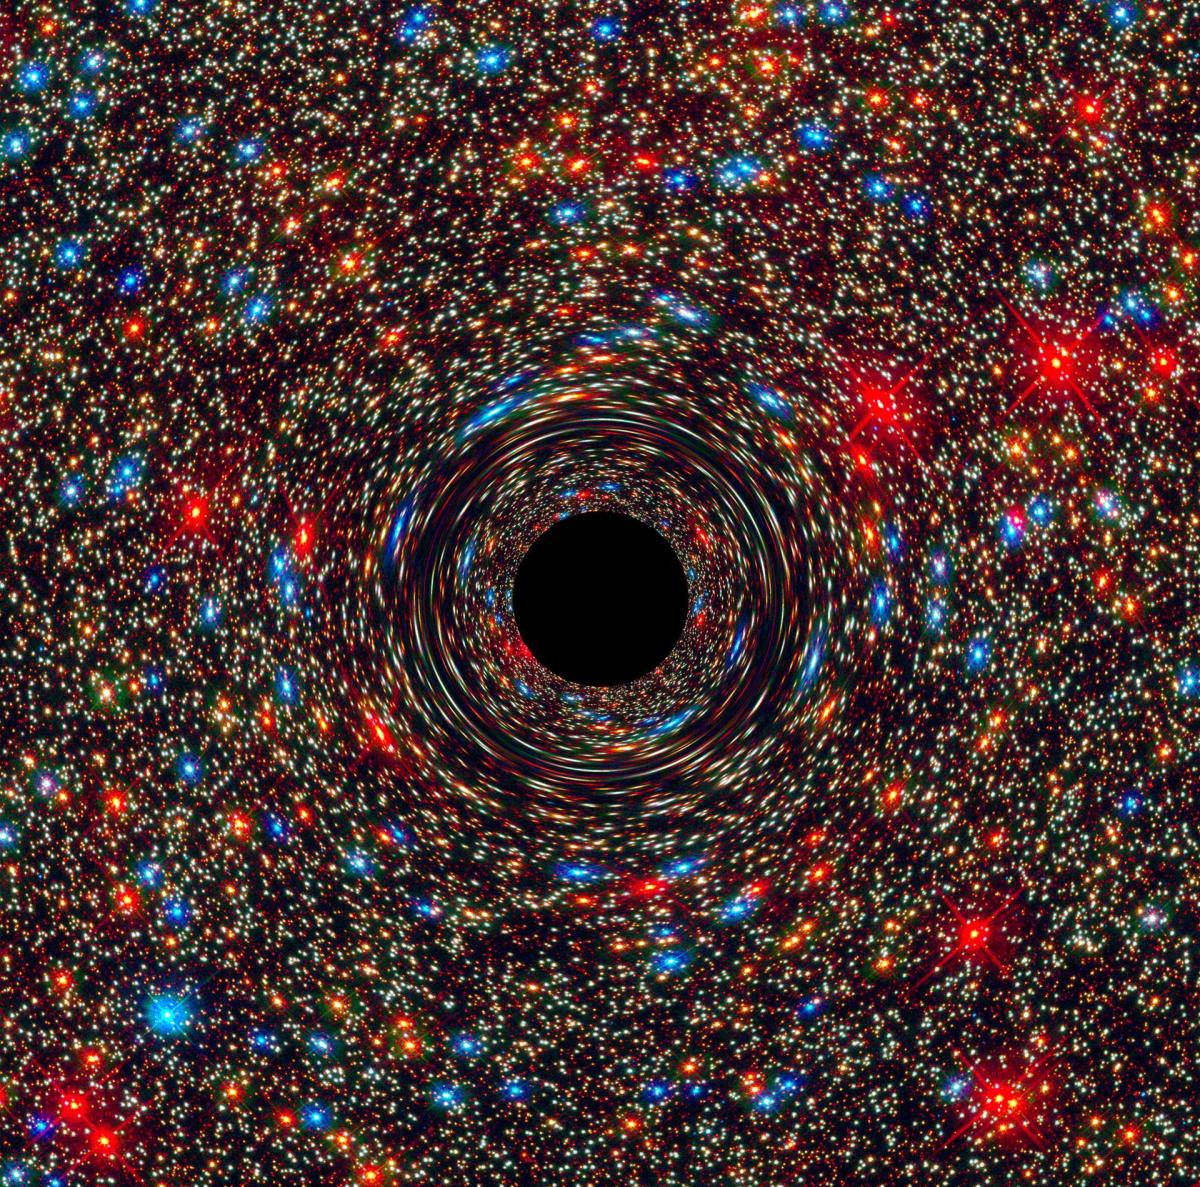 What would happen if you fell into a black hole? Spaghettification